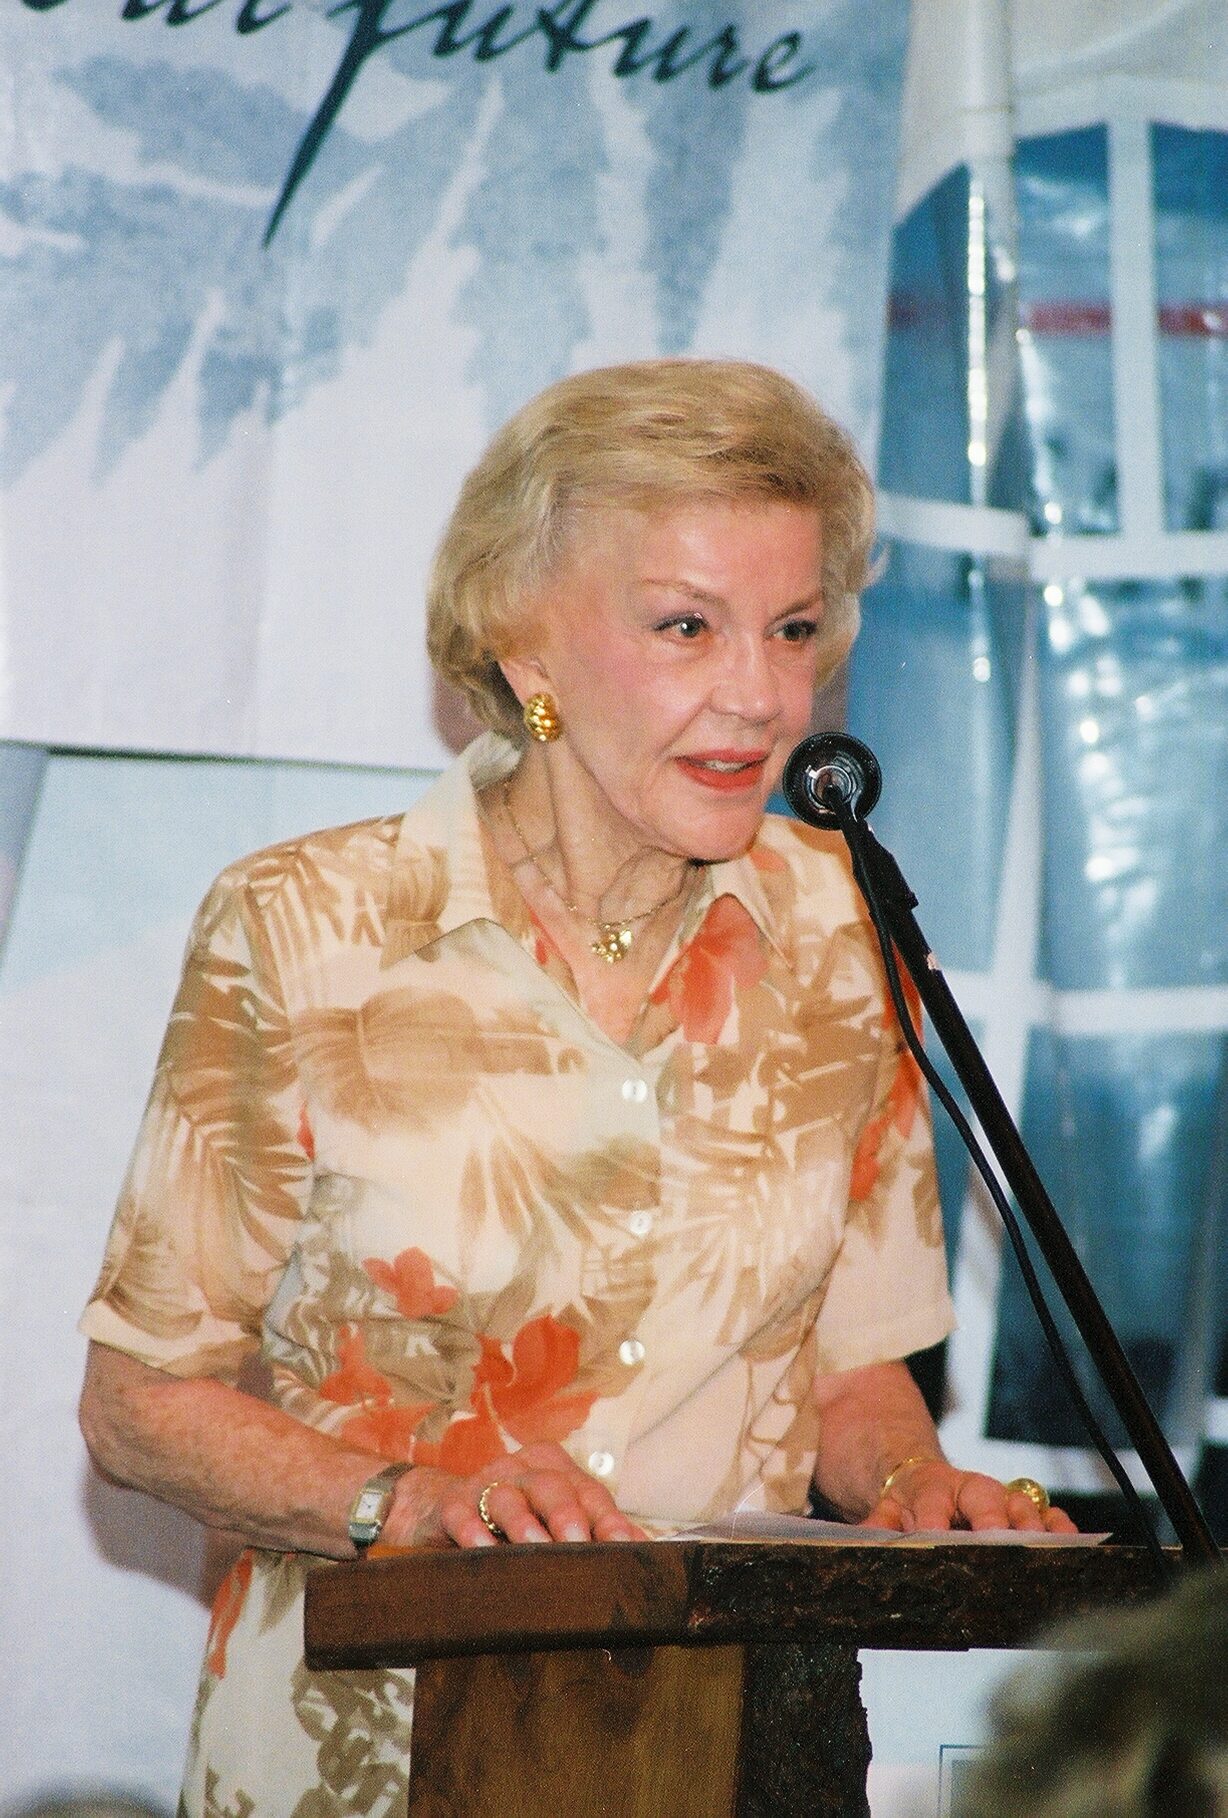 Peggy Darrin at an LGLC event at The Hyde, July 2005